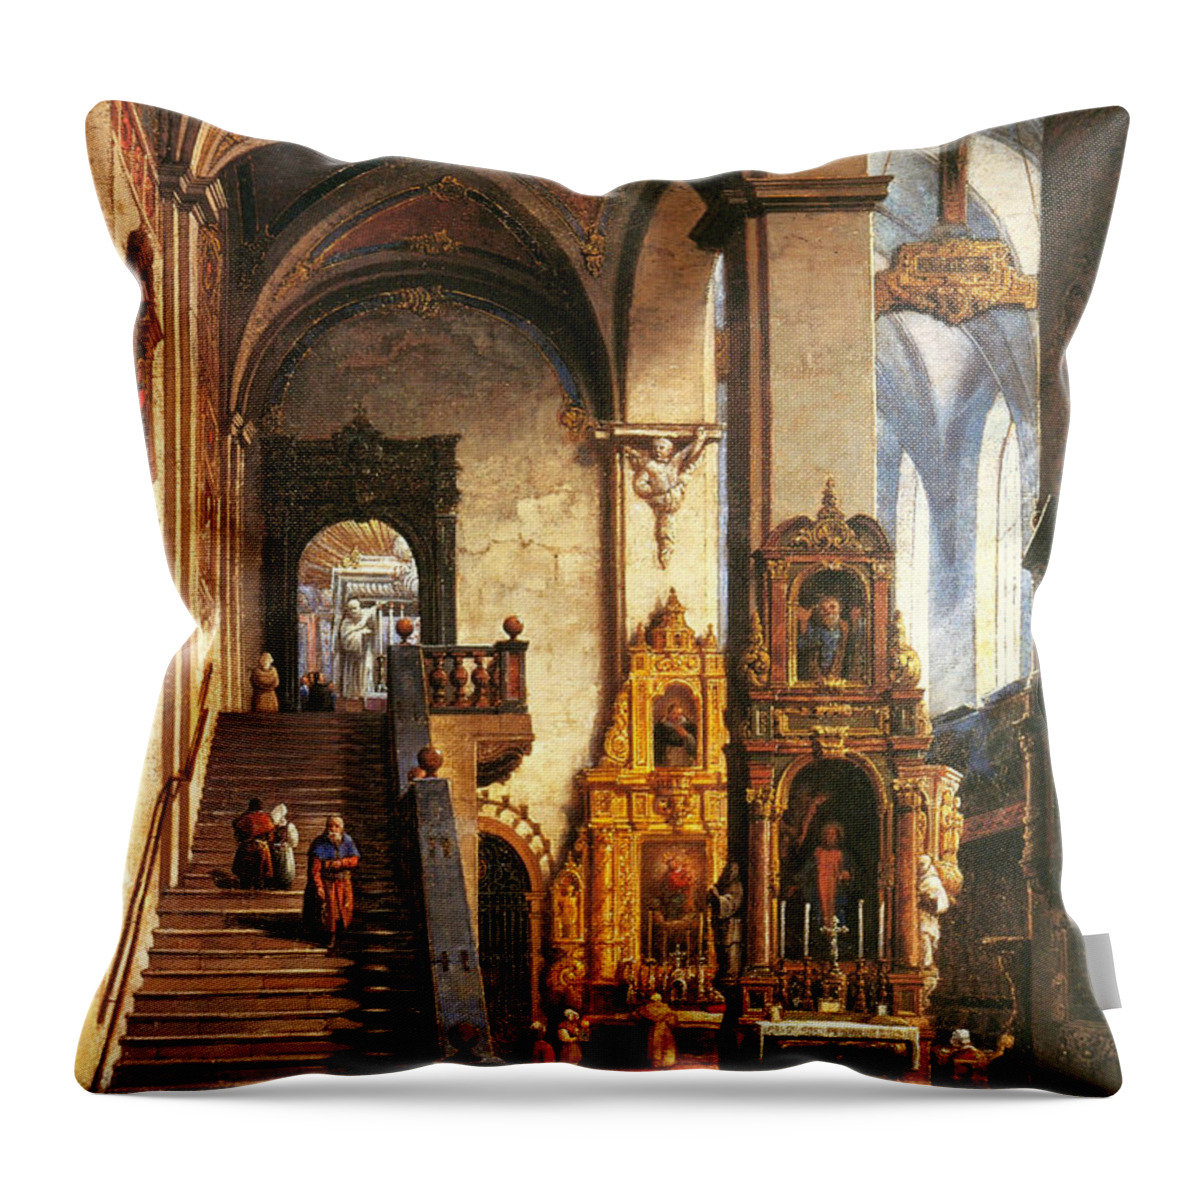 Marcin Zaleski Throw Pillow featuring the painting Interior of the Dominican Church in Krakow by Marcin Zaleski